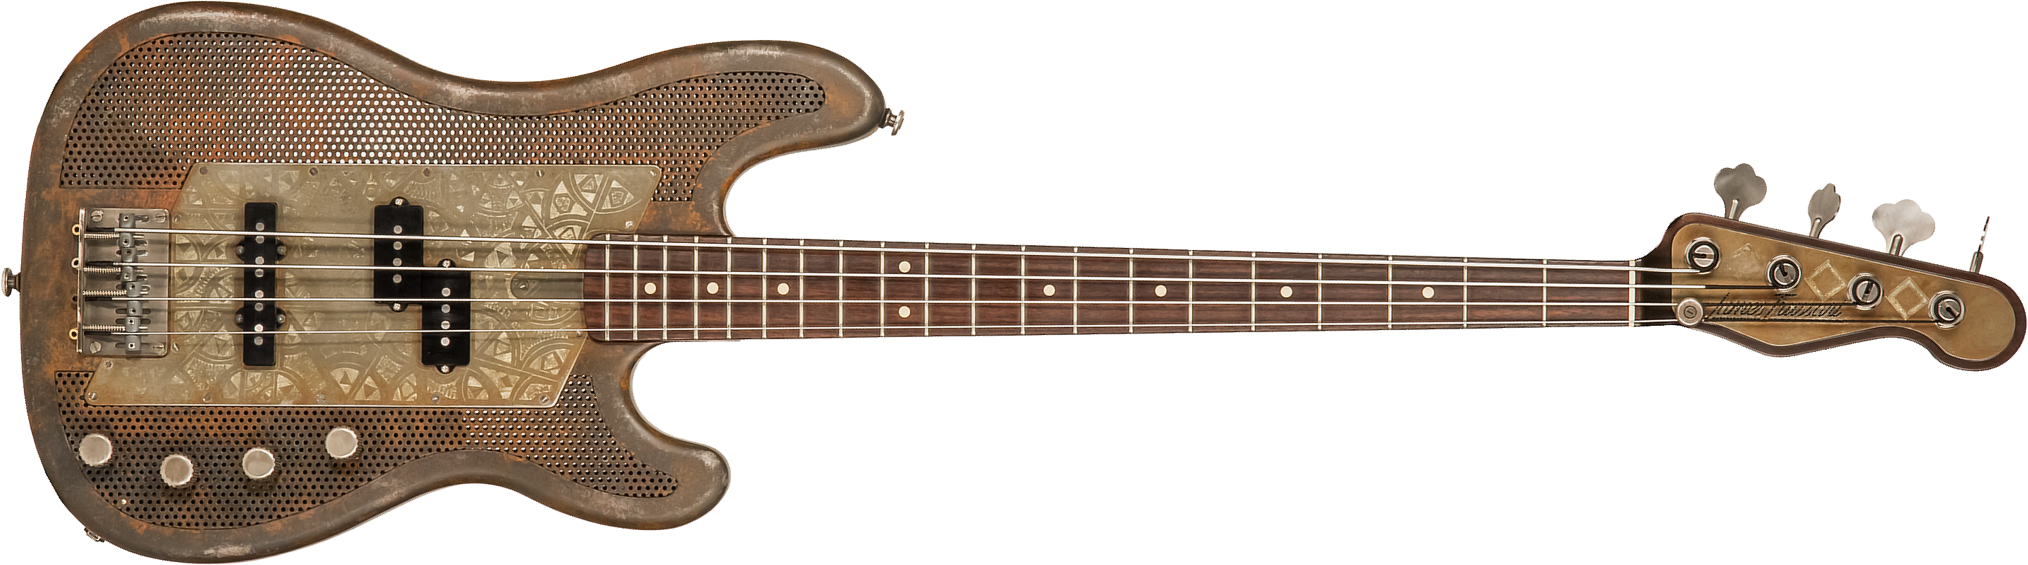 James Trussart Steelcaster Bass Perforated Active Pf #19045 - Rust O Matic African Engraved - Solid body elektrische bas - Main picture